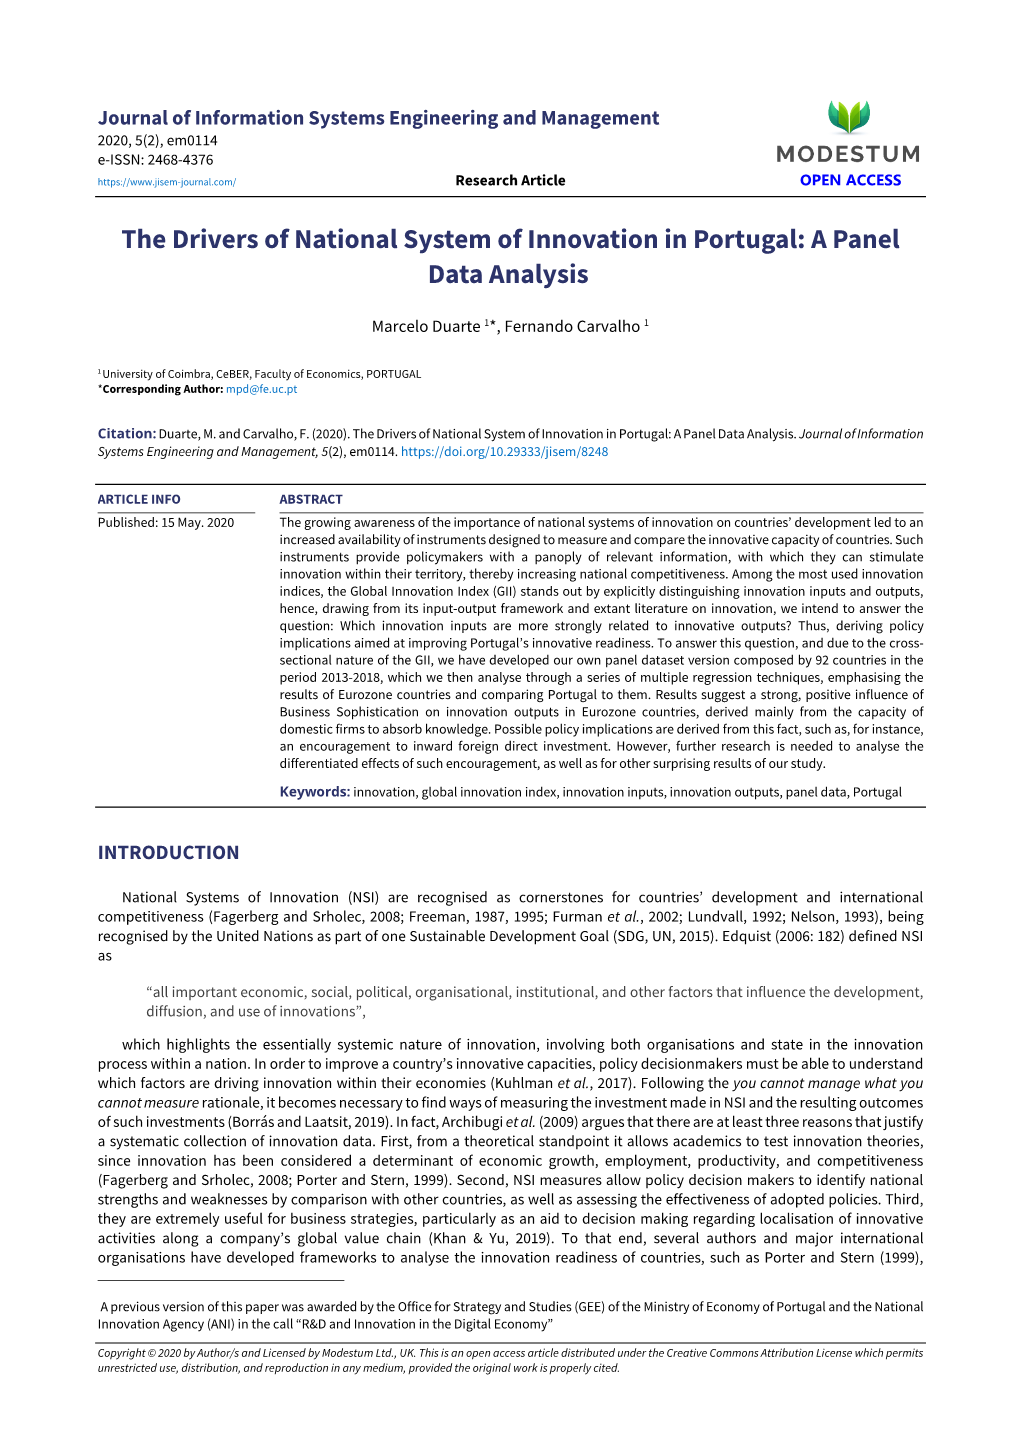 The Drivers of National System of Innovation in Portugal: a Panel Data Analysis